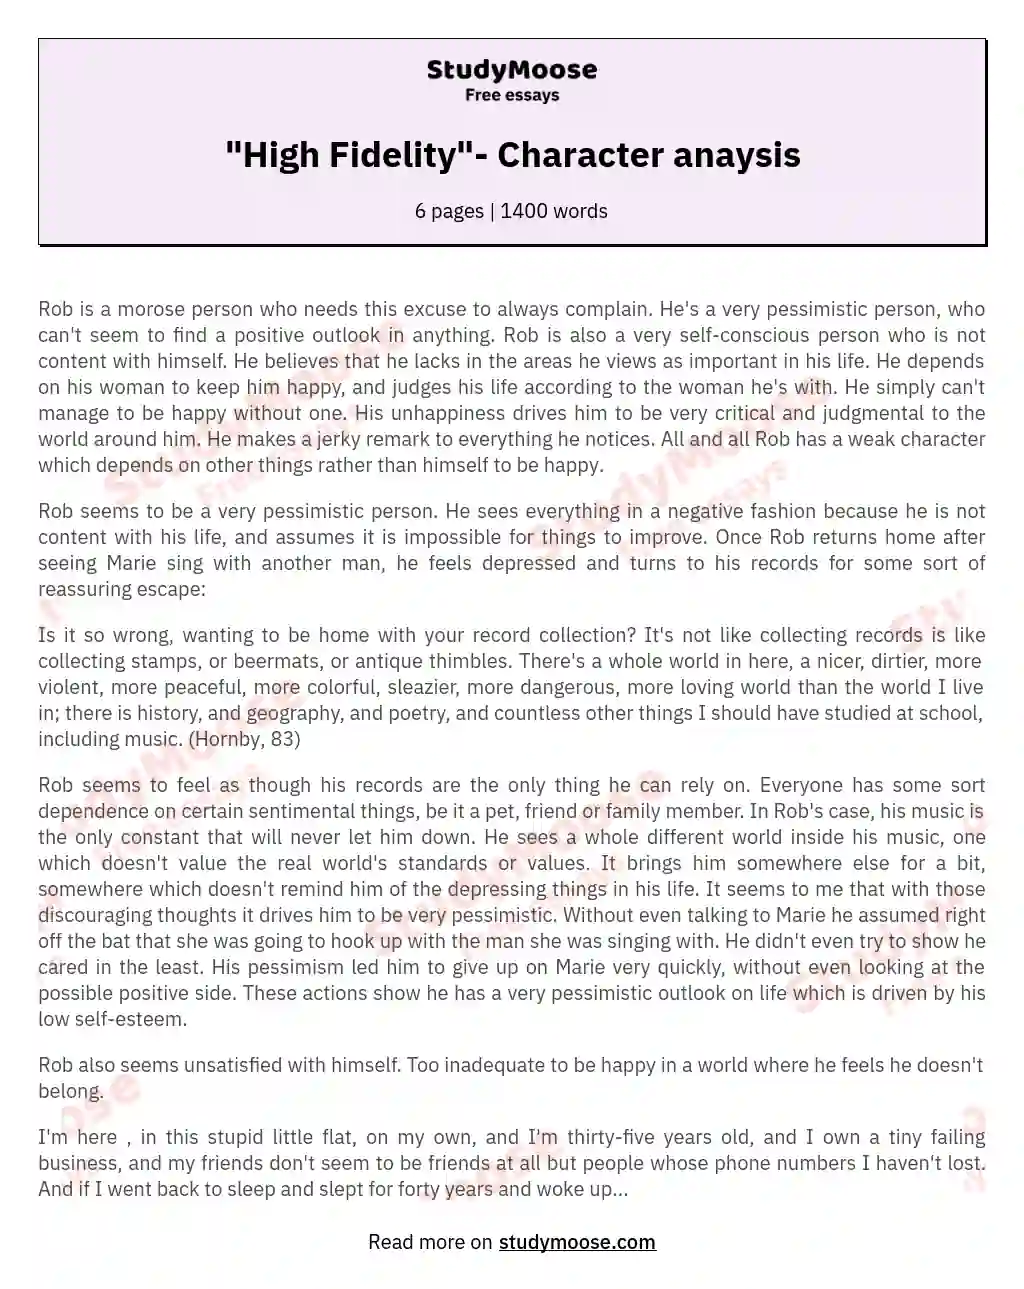 "High Fidelity"- Character anaysis essay